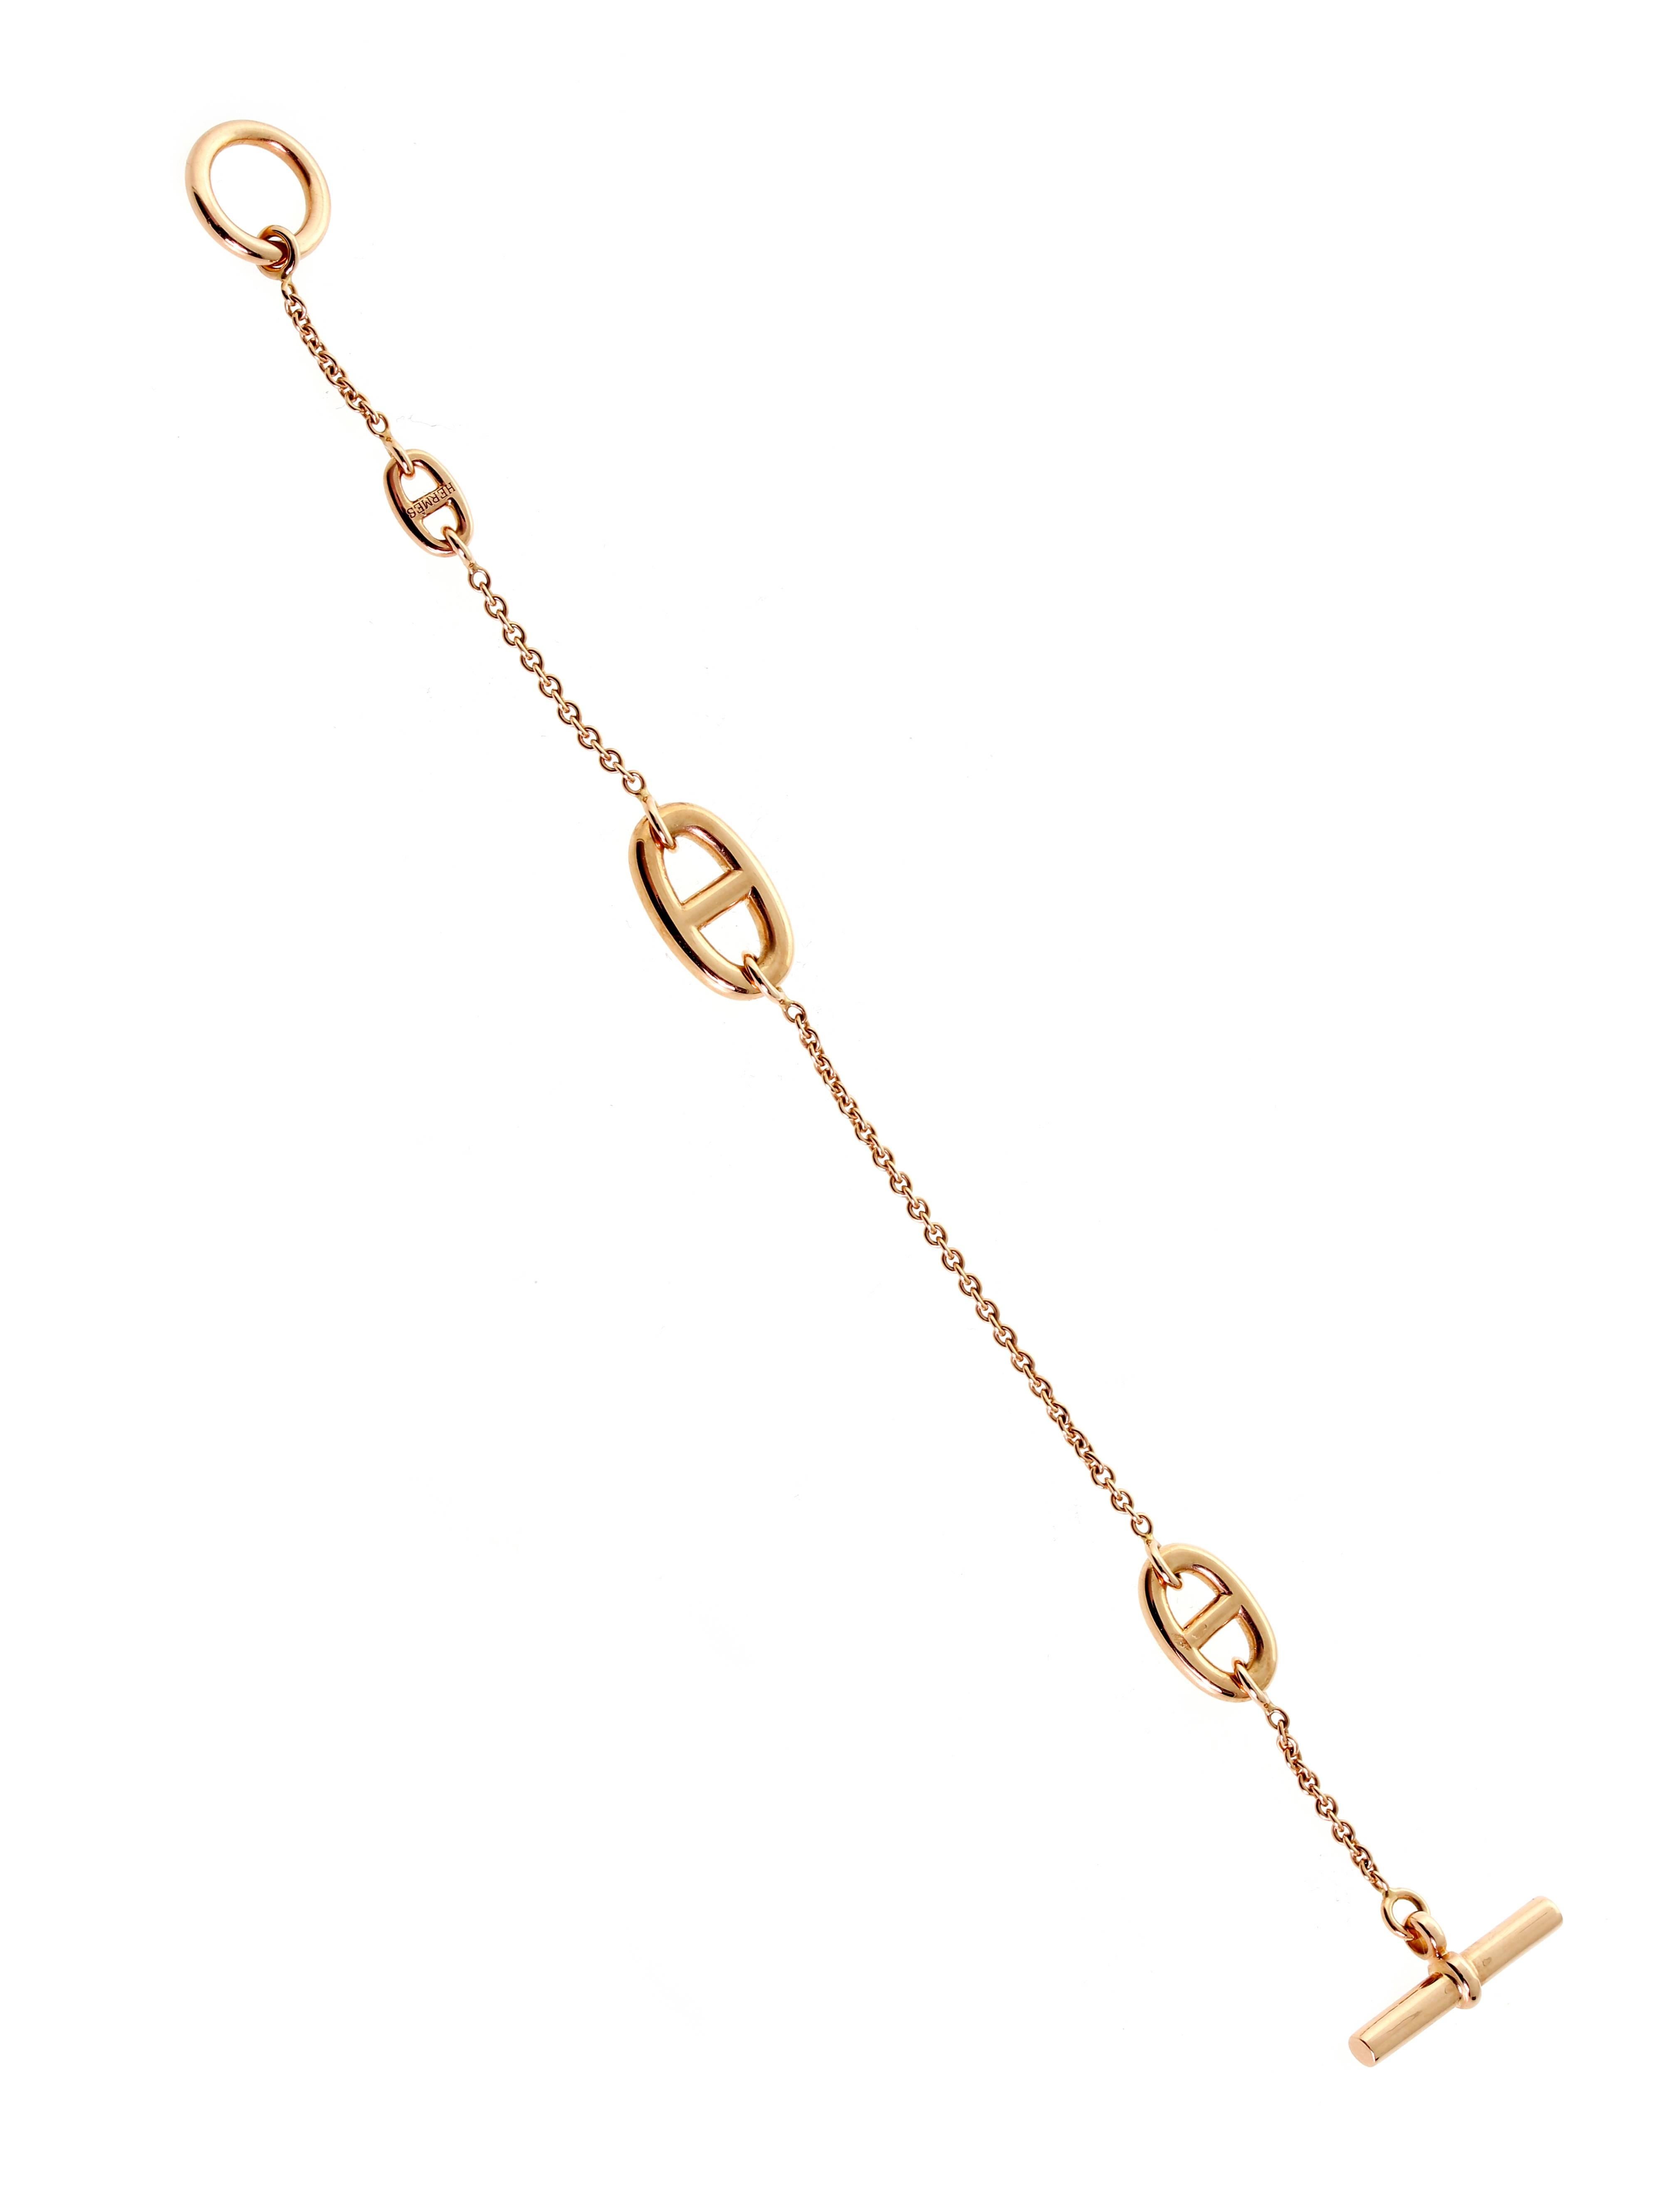 A perfect light and airy bracelet by Hermes from the Farandole collection crafted in 18k rose gold. The bracelet measures 7